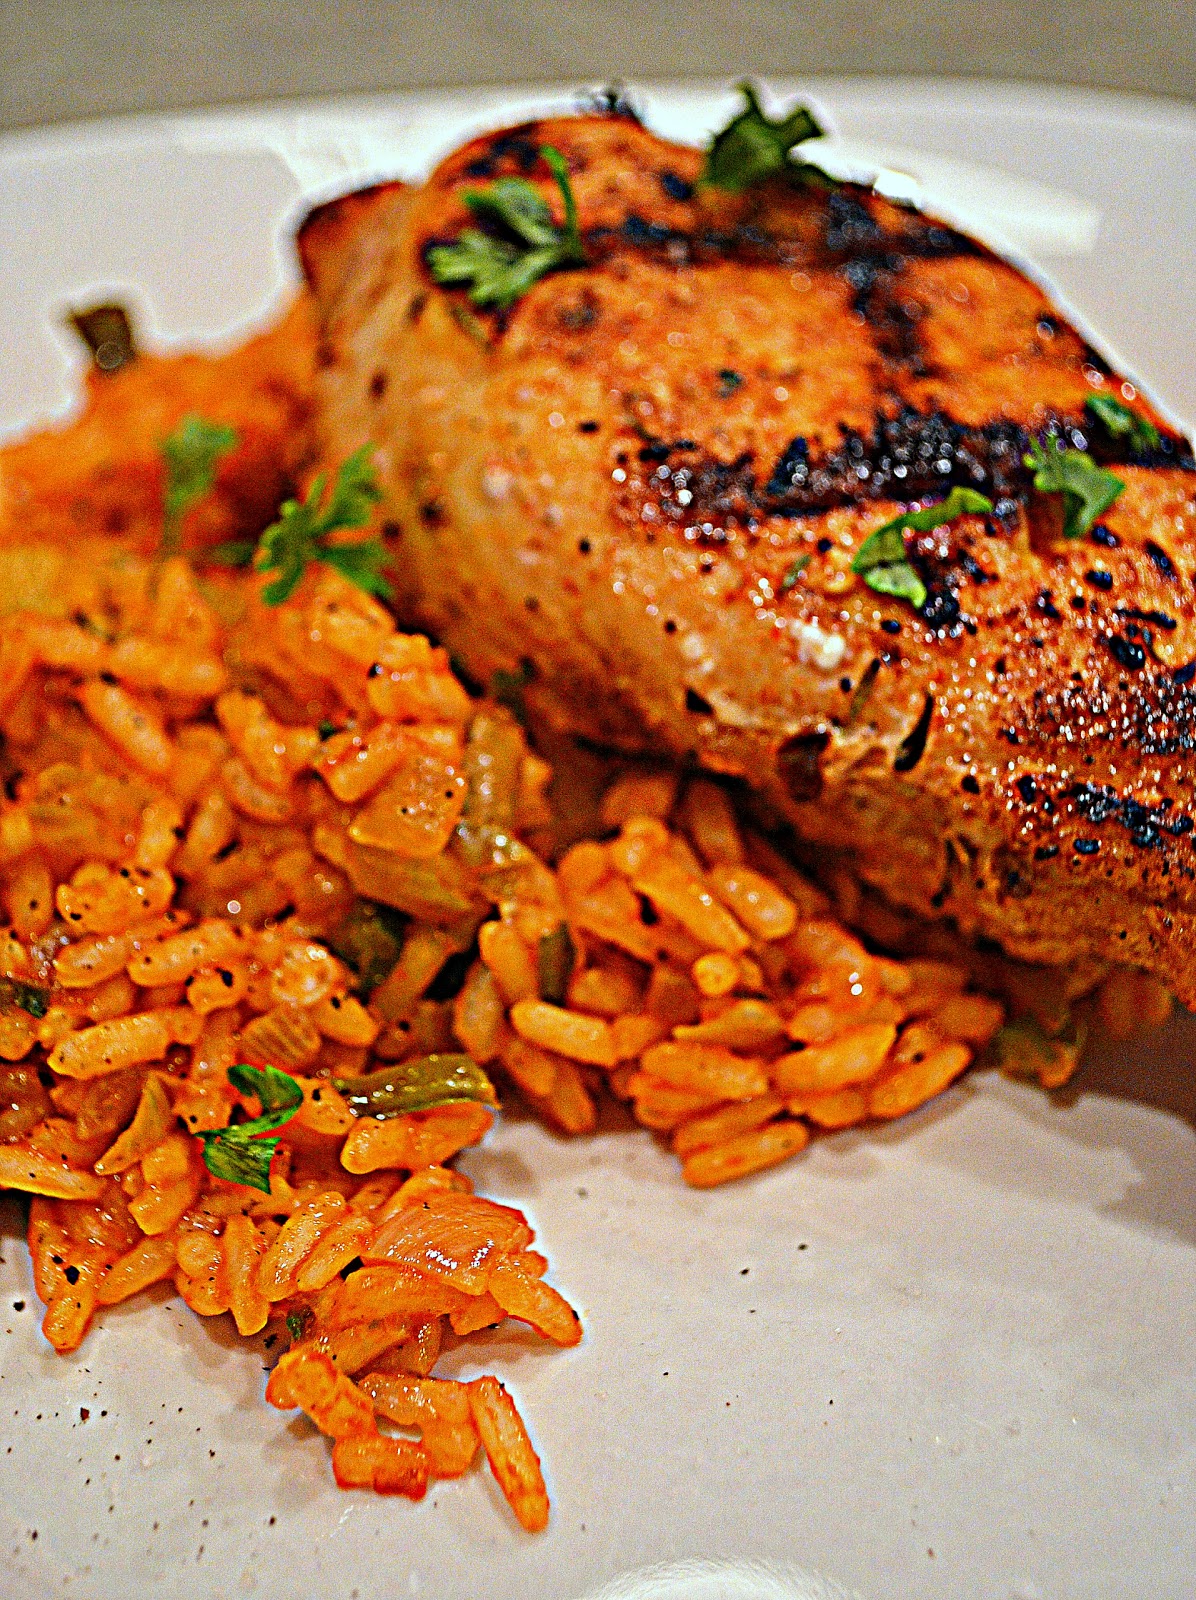 Cooking With Toots: Spicy Spanish Rice and Grilled Chicken